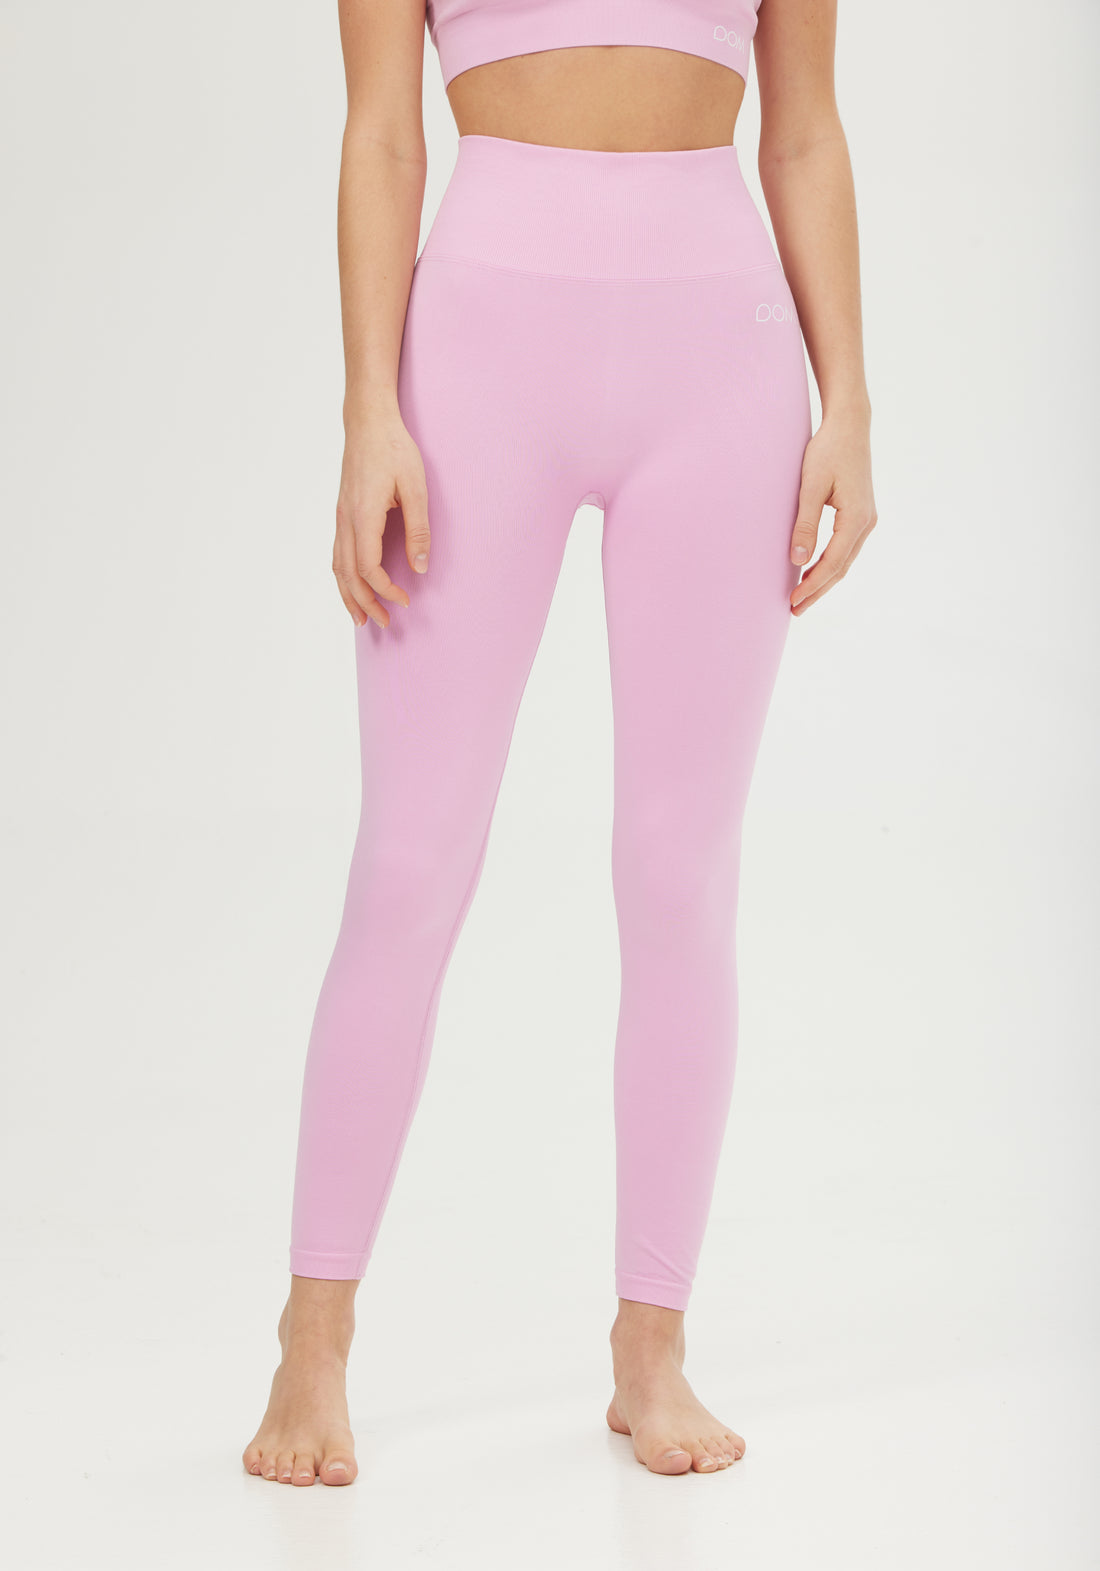 Tights Seamless Pink Luxe 